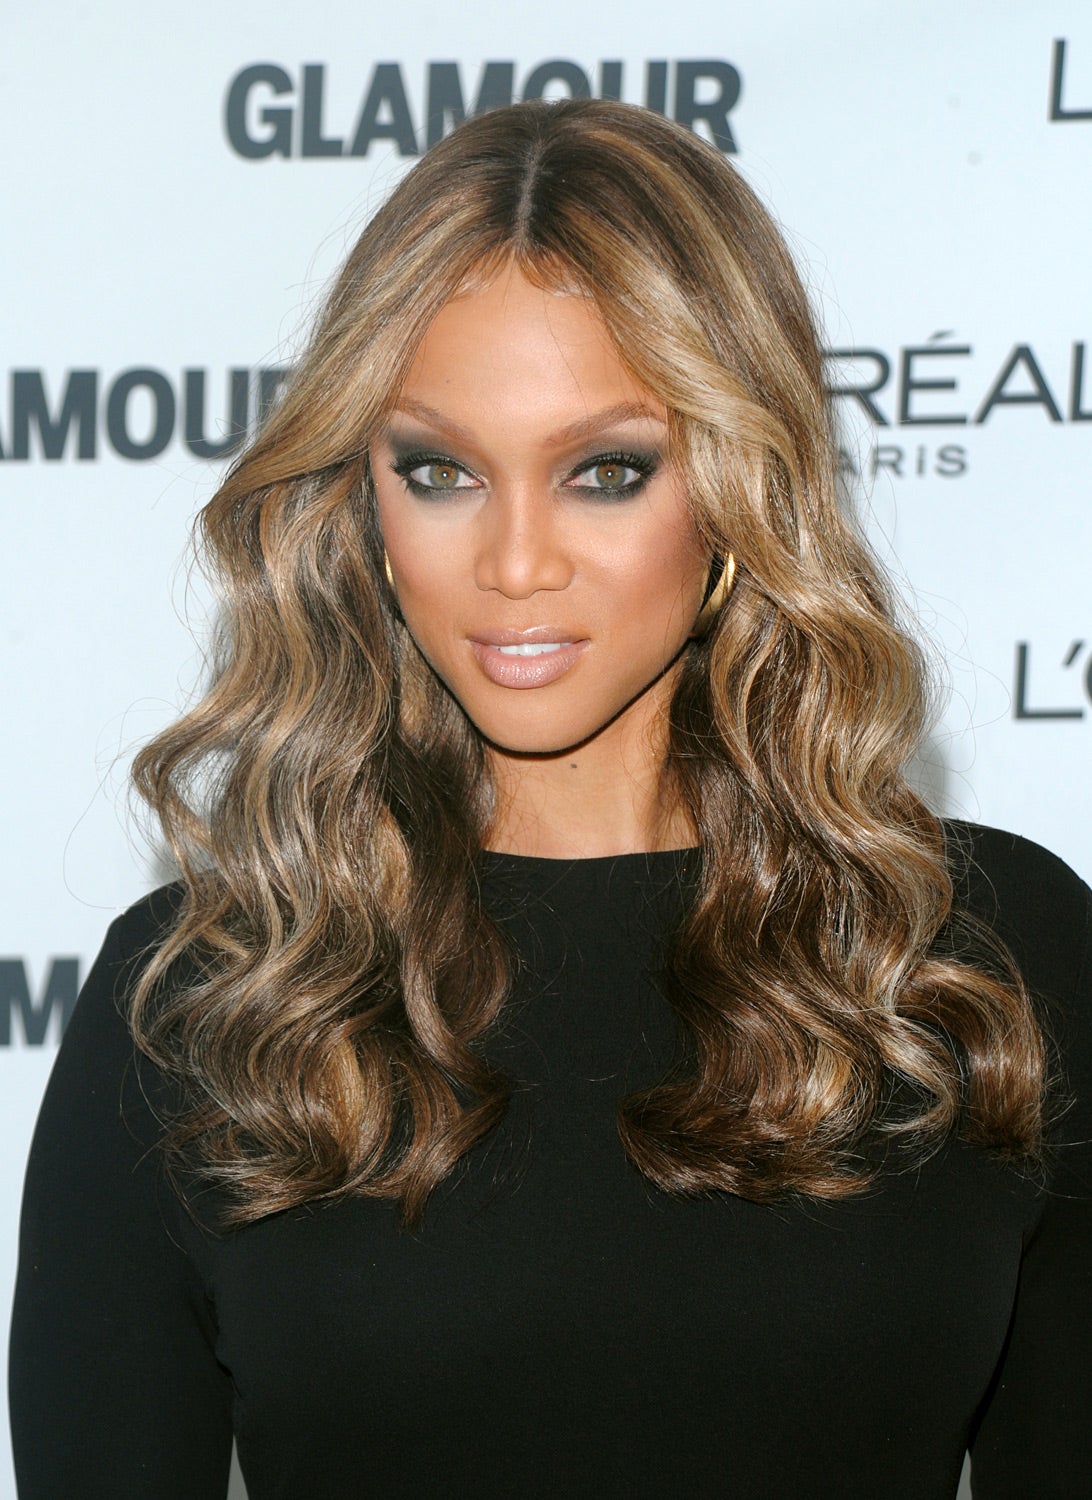 Tyra Banks Blasts Fashion Industry For Pressuring Young Models